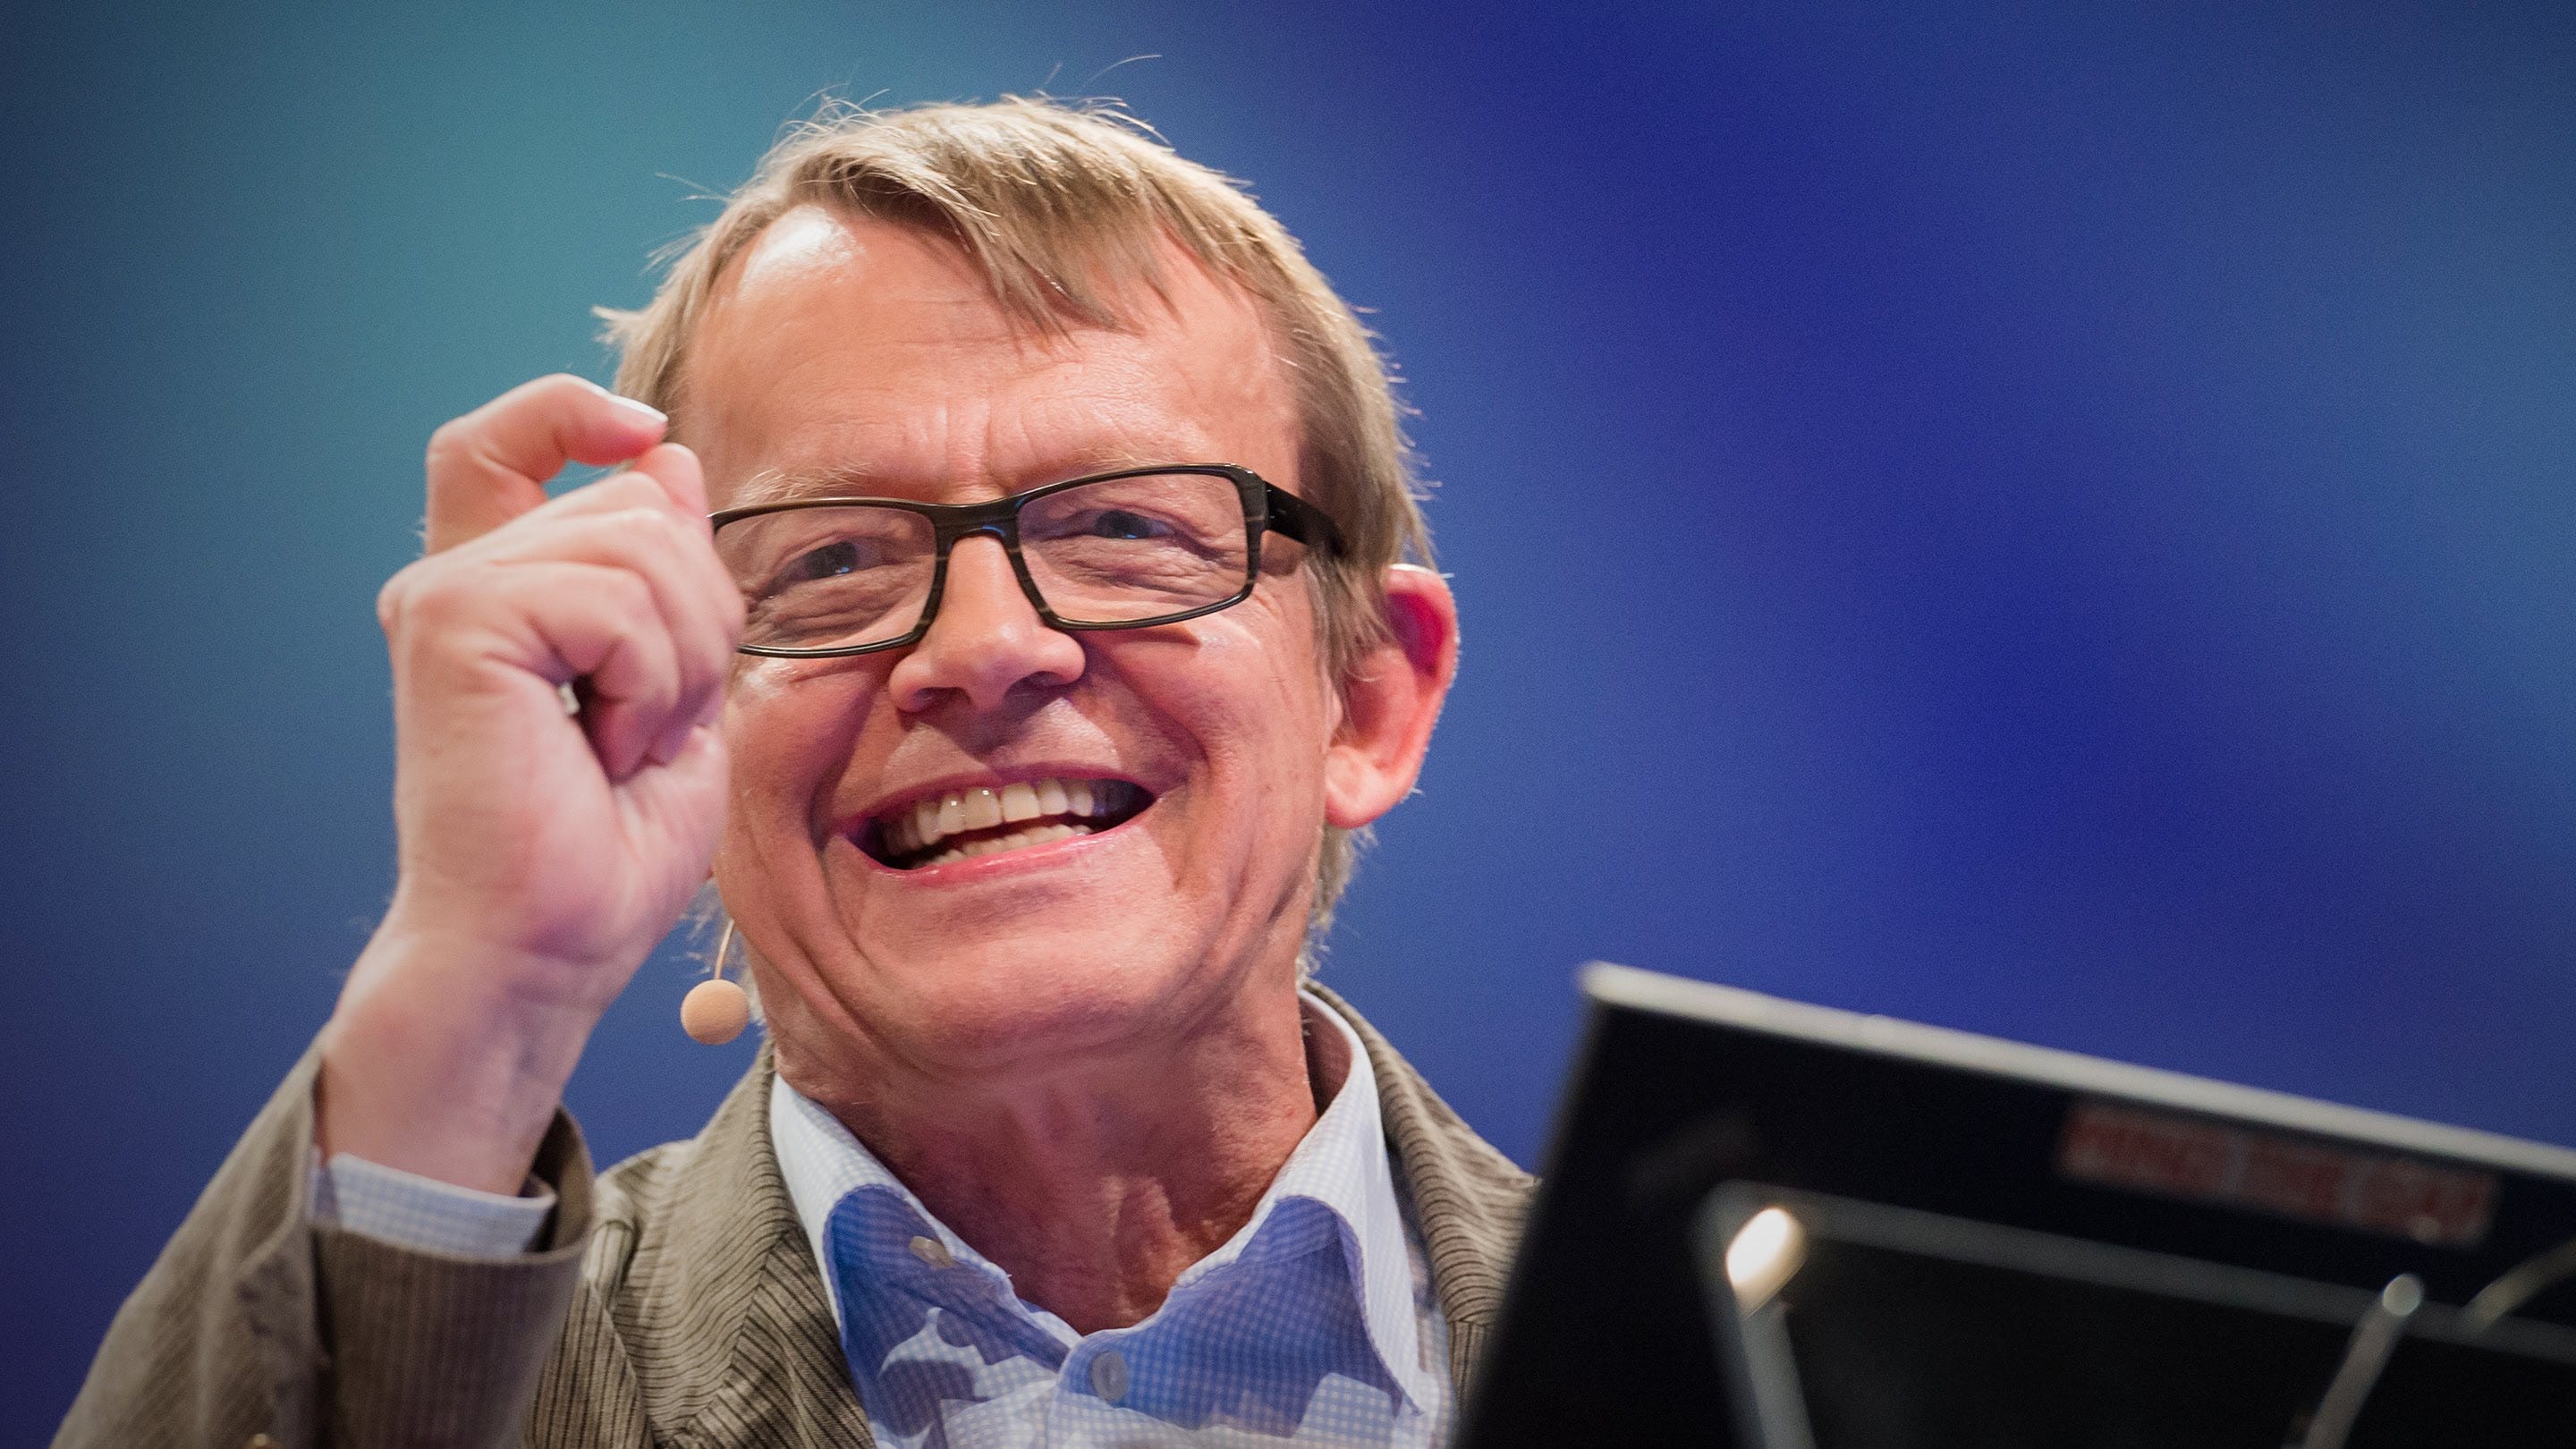 Relatable Big Data: The Remarkable Life of Hans Rosling | by Dwight Sproull  | Humaniq